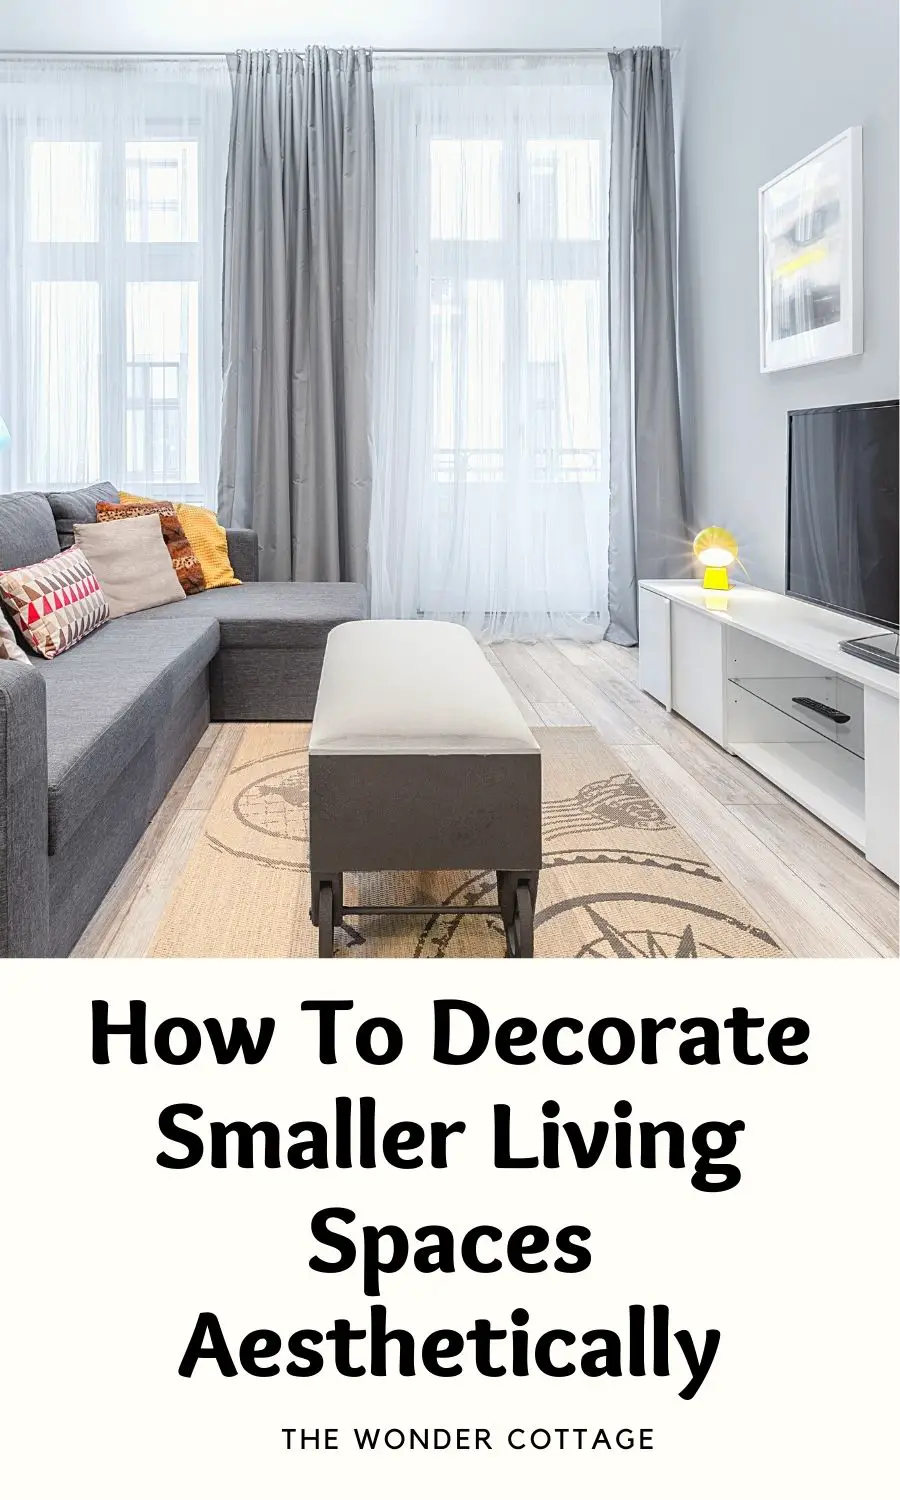 How To Decorate Smaller Living Spaces Aesthetically